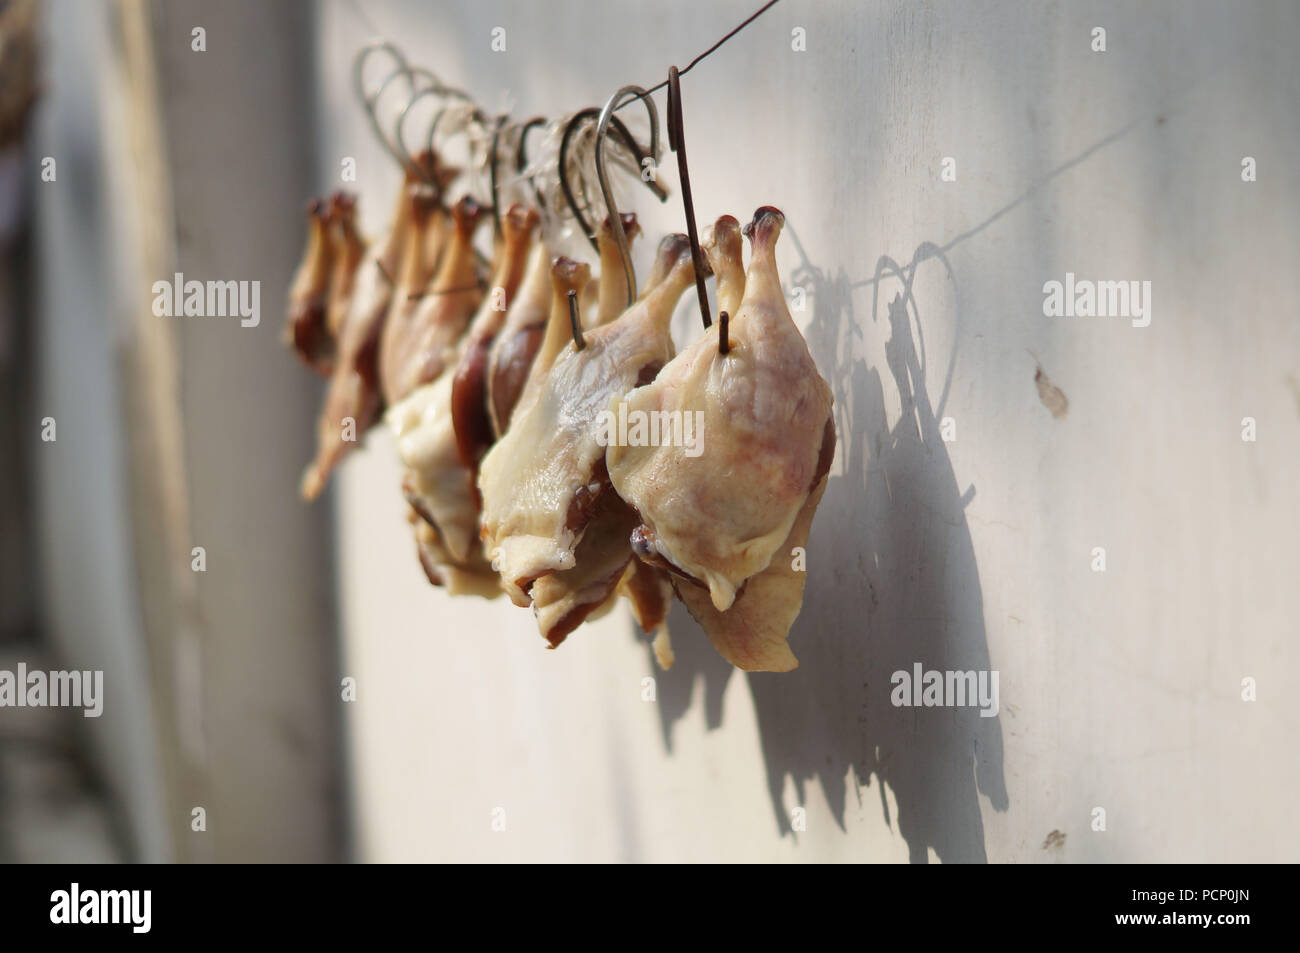 Chicken hanging on hooks to dry outside Stock Photo